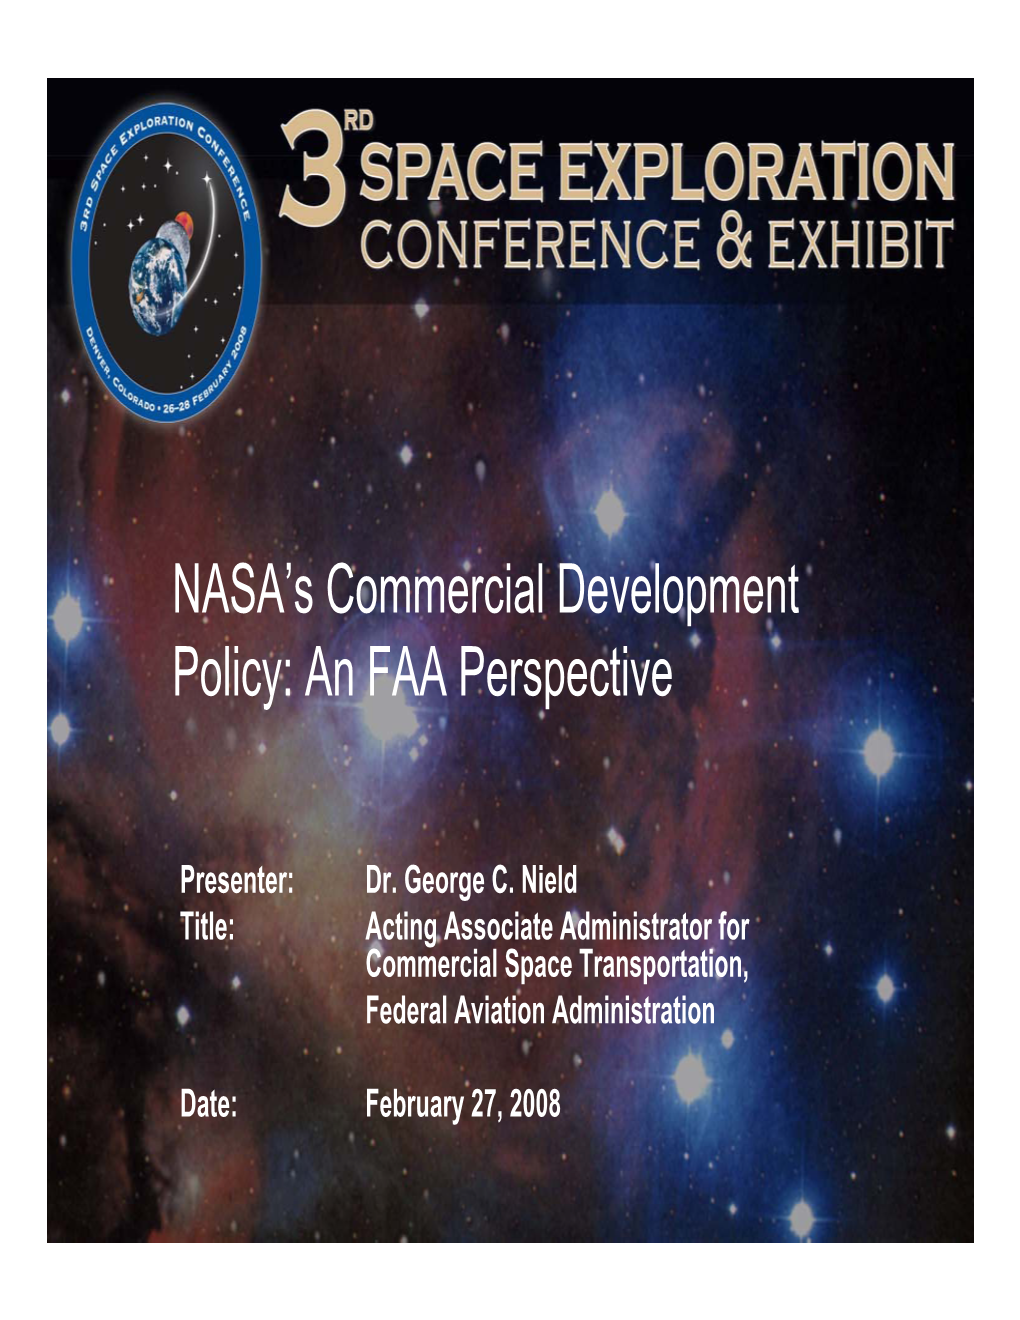 NASA's Commercial Development Policy: an FAA Perspective